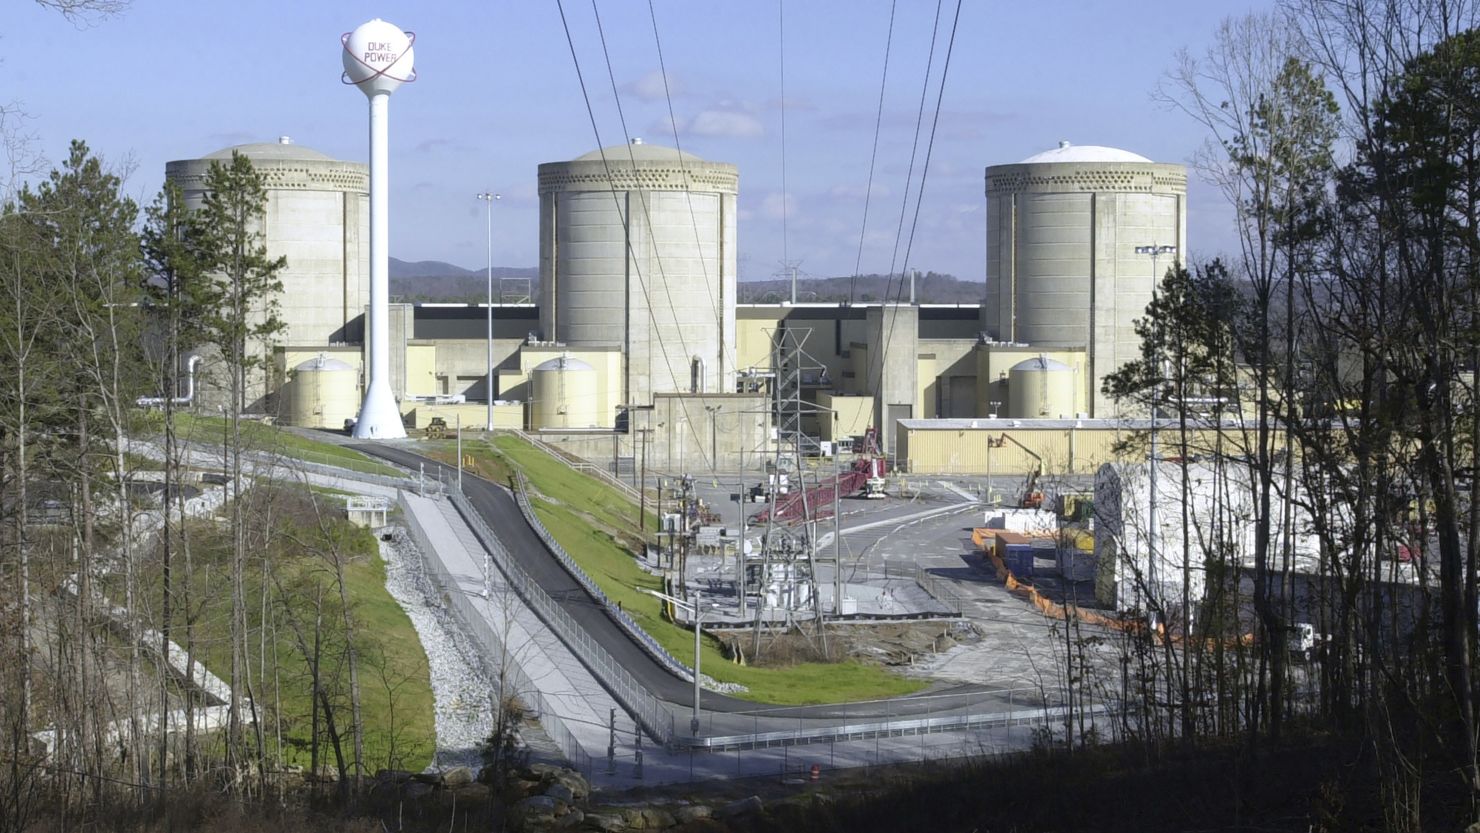 FILE - This Saturday, Jan. 8, 2005 file photo shows Oconee Nuclear Station in Seneca, S.C.  A driver tried to crash through the exit gates of a South Carolina nuclear plant Thursday, Nov. 2, 2023 about an hour after security asked the same car to leave when it tried to enter, authorities said.(AP Photo/Mary Ann Chastain, File)